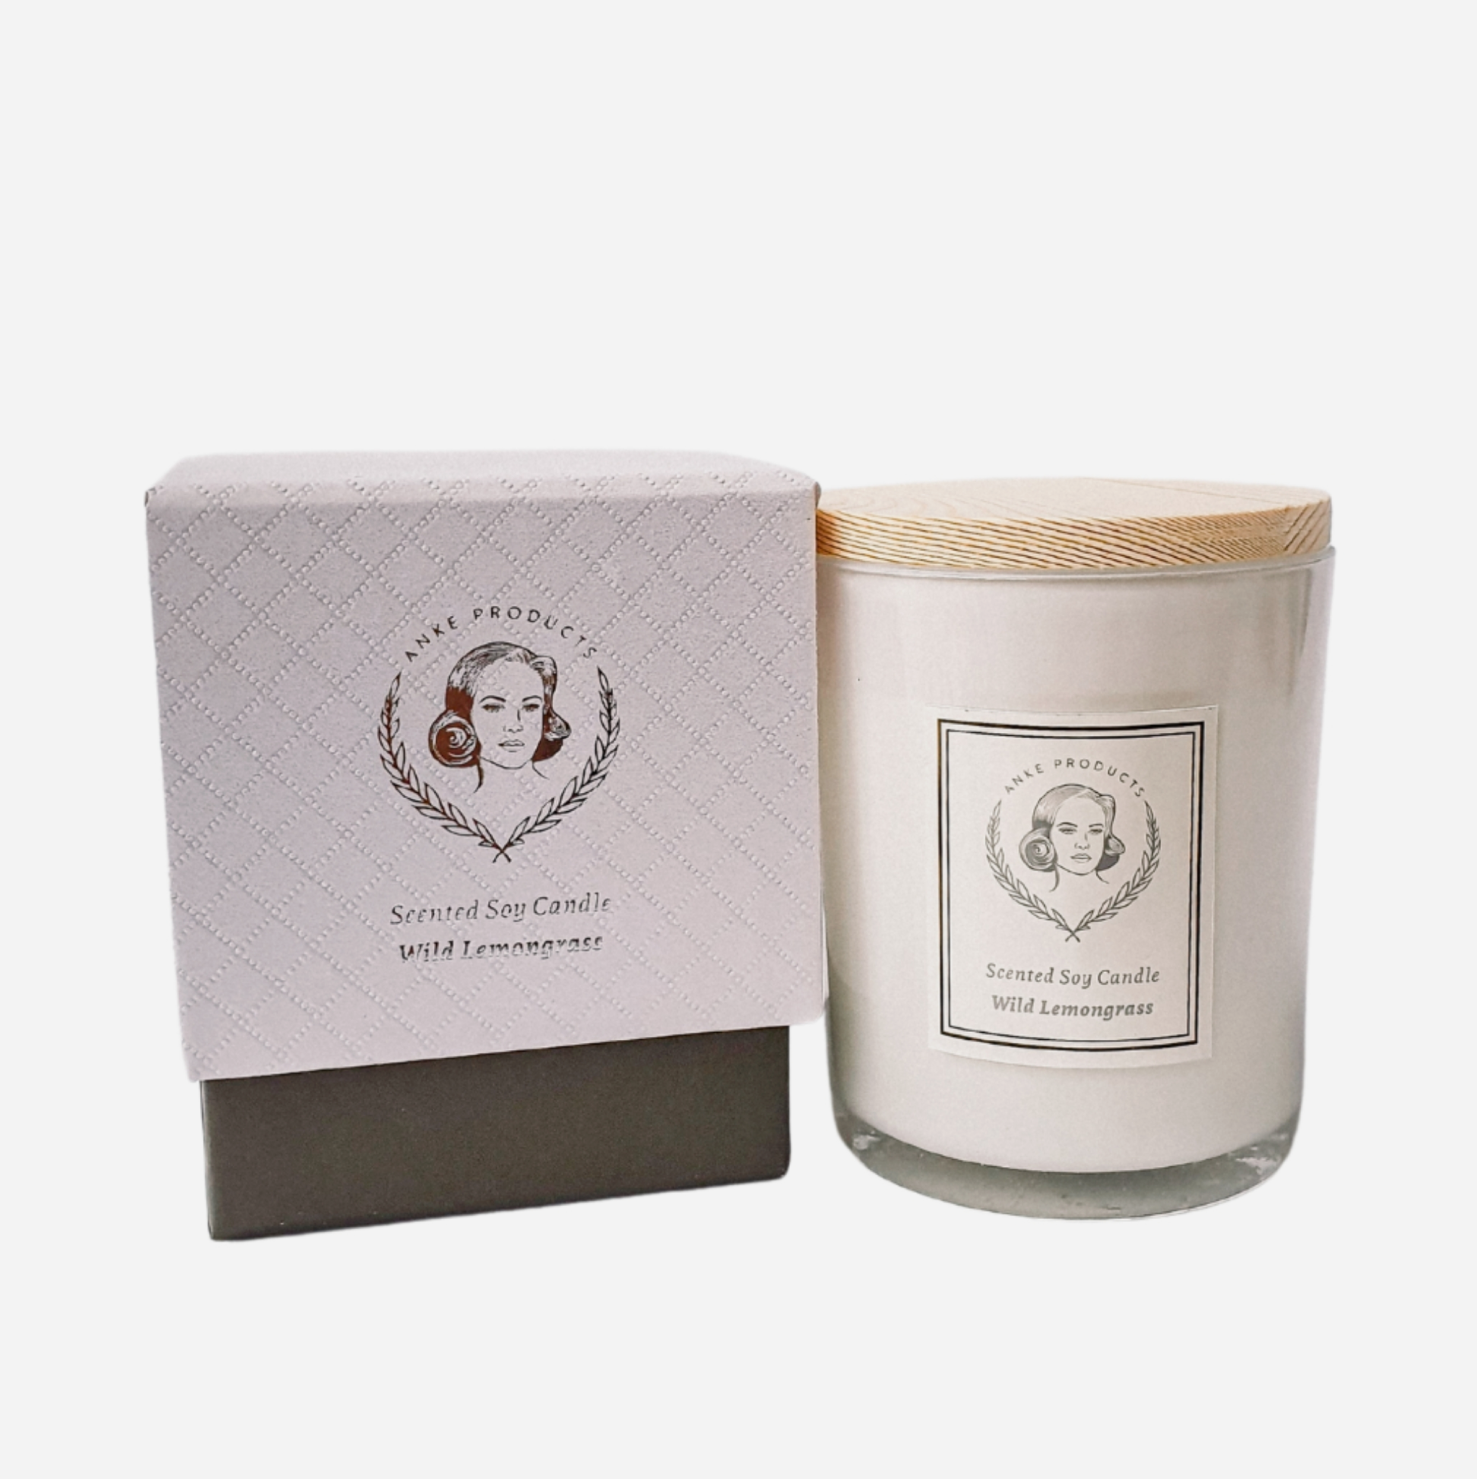 Scented Soy Candle - Wild Lemongrass